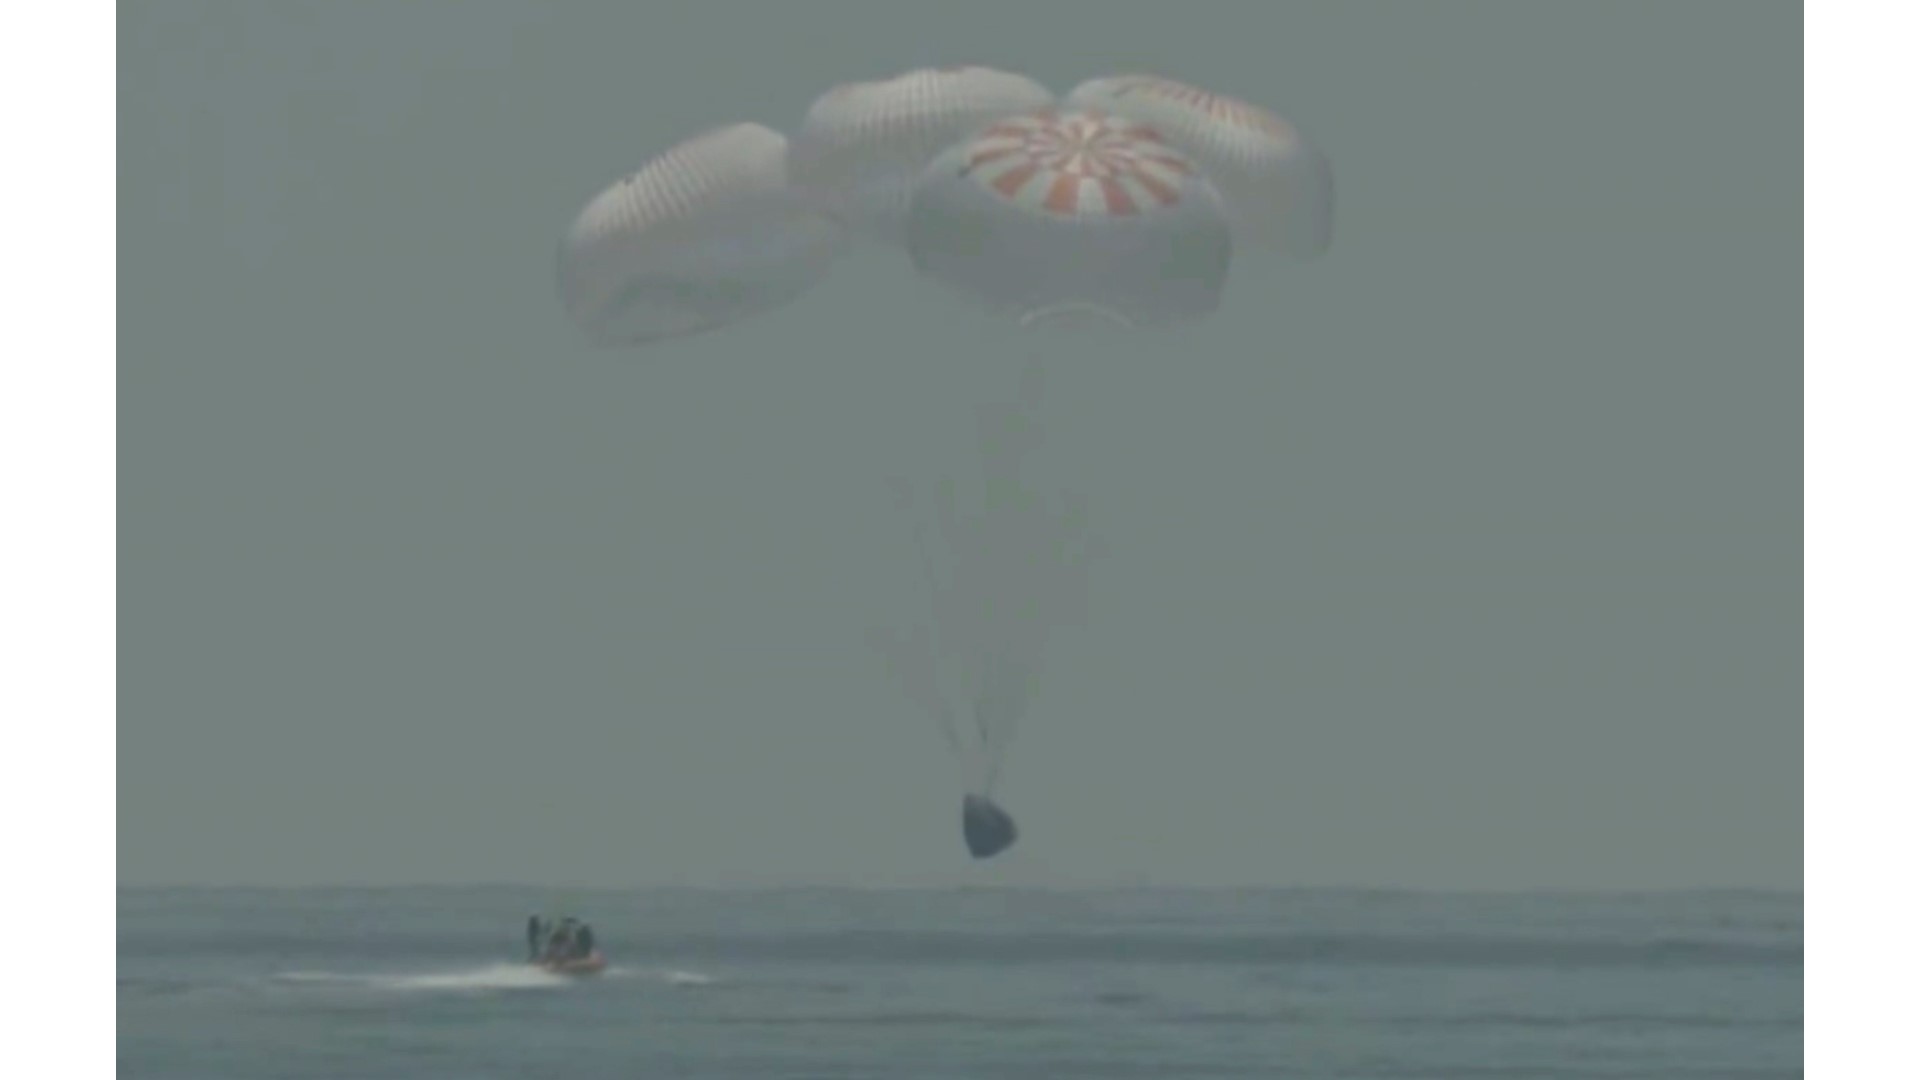 Two NASA astronauts returned to Earth on Sunday in a dramatic, retro-style splashdown, their capsule parachuting into the Gulf of Mexico.